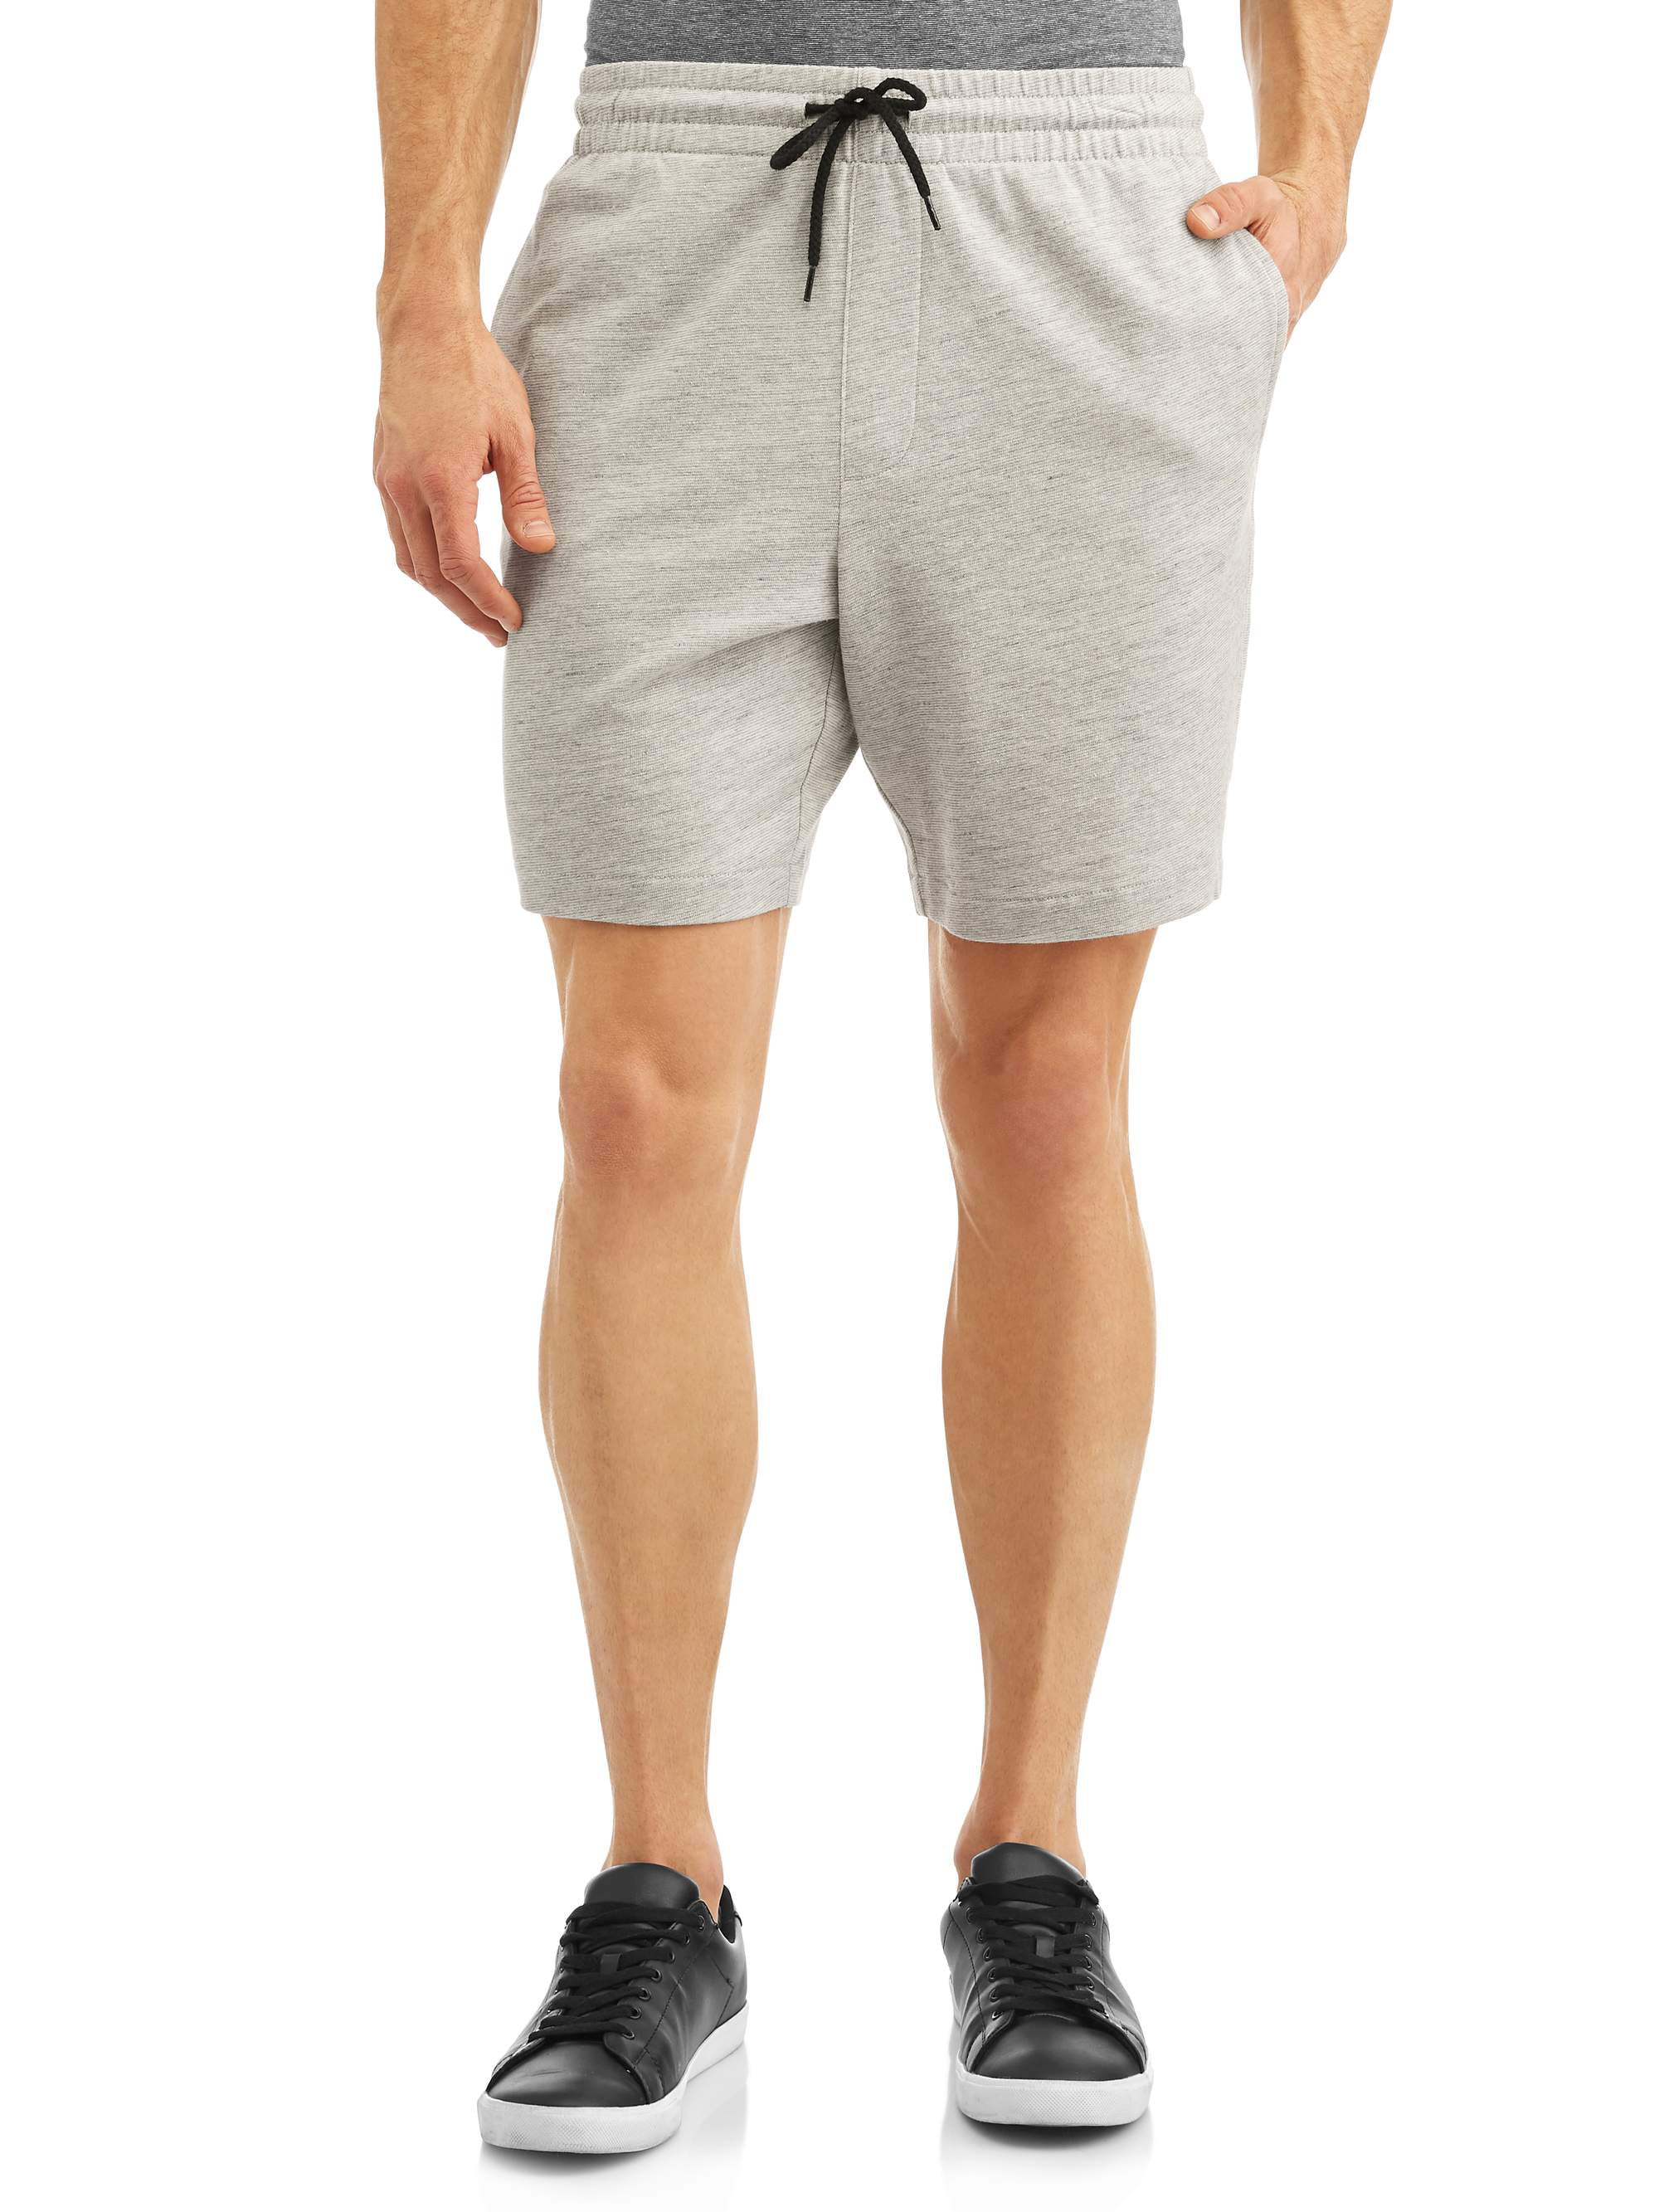 How to get the Best Men's Shorts – Telegraph